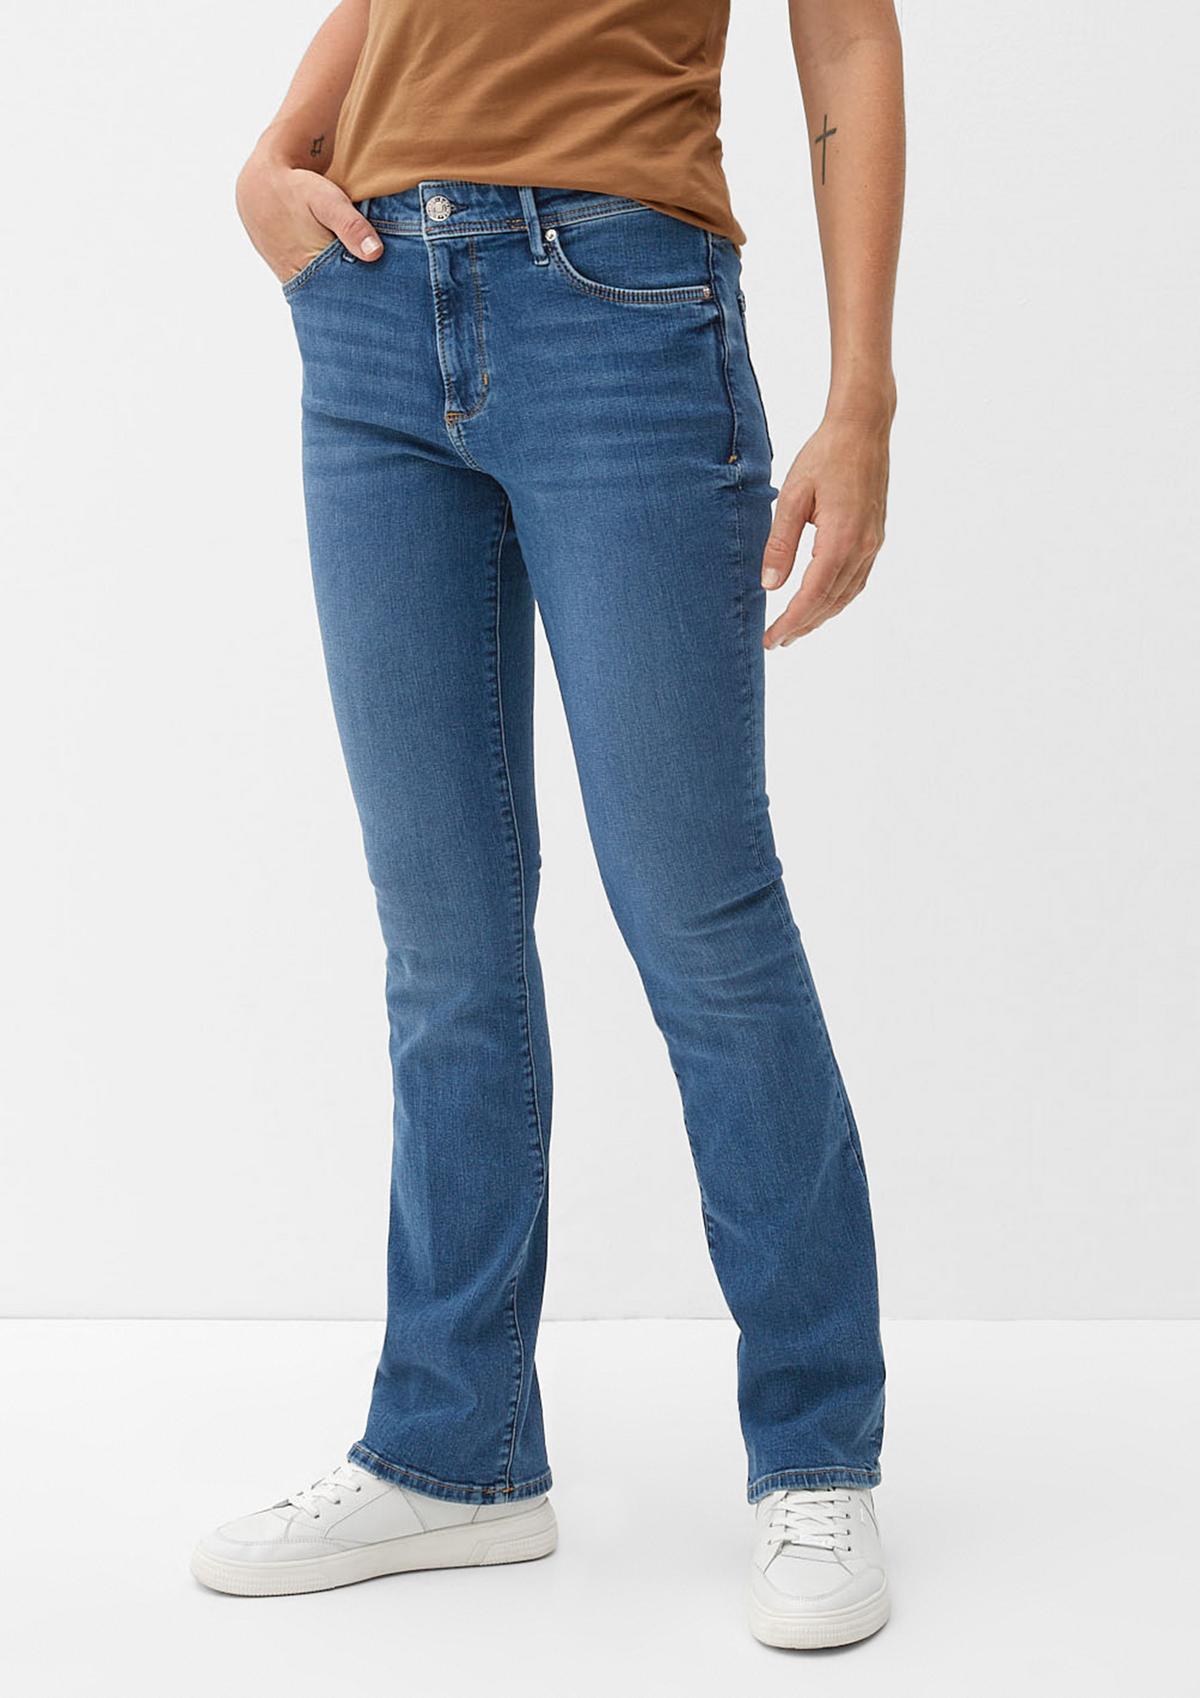 s.Oliver Jeans Beverly / Slim Fit / Mid Rise / Bootcut Leg 